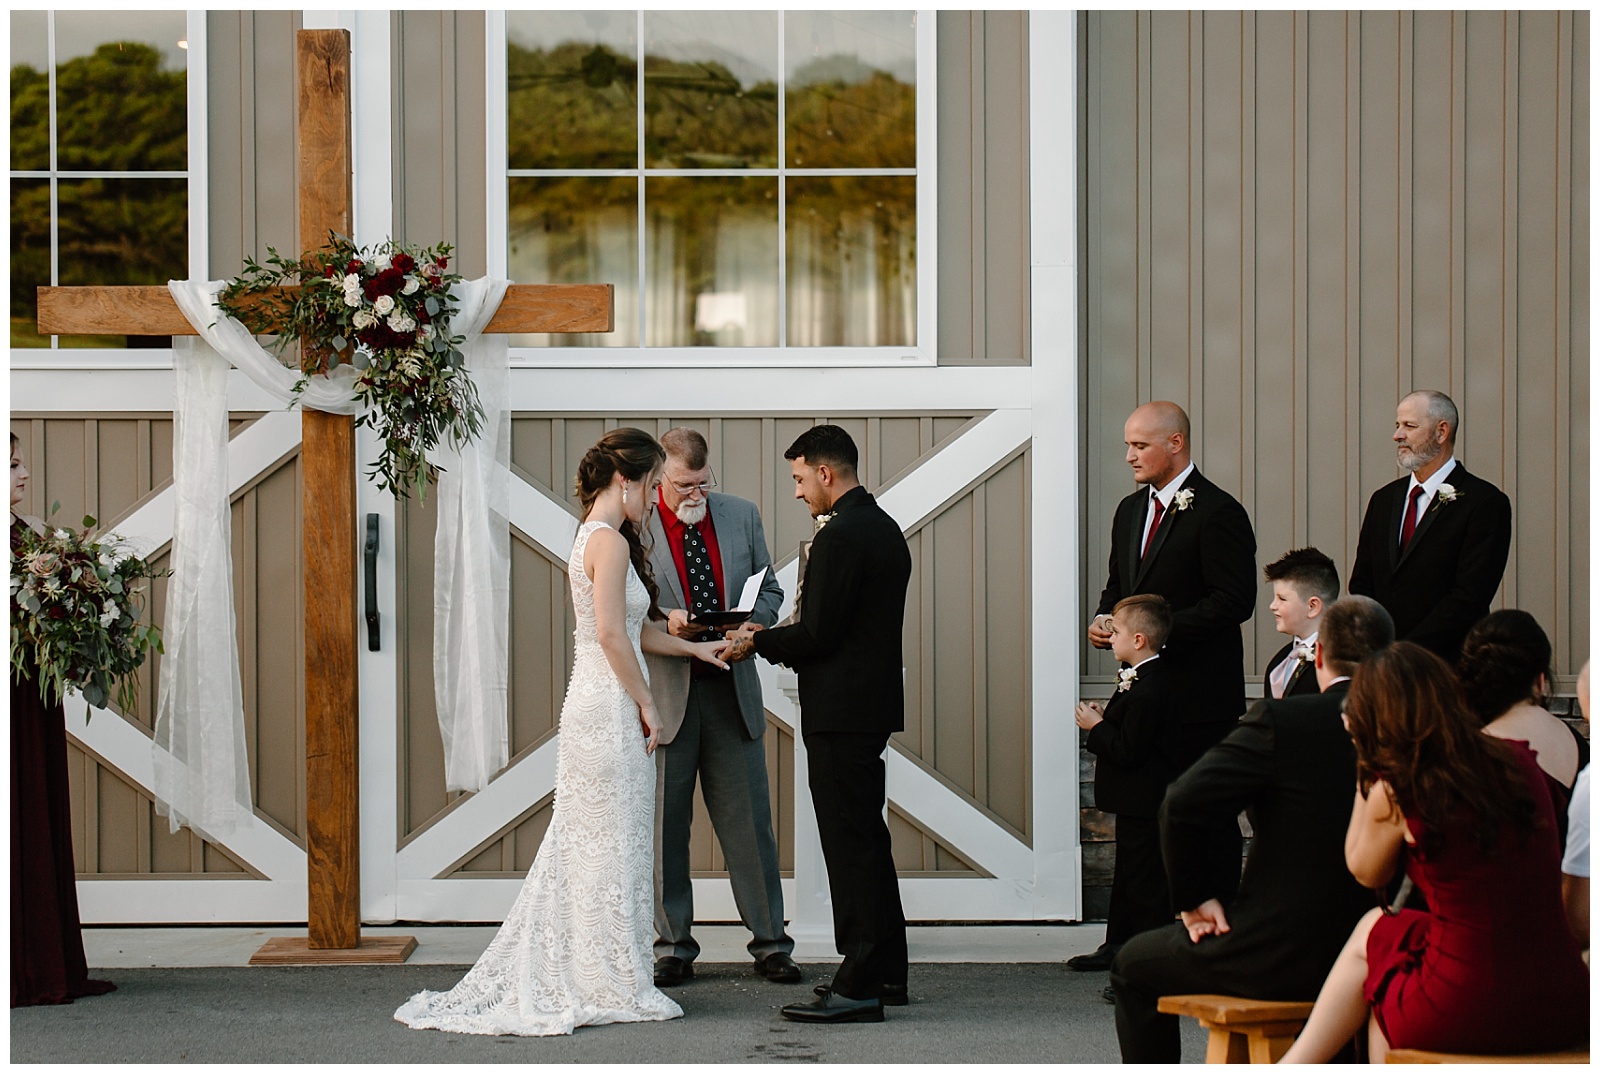 Bride and groom stand hand in hand and place rings on each other's fingers during outdoor wedding ceremony in front of barn doors